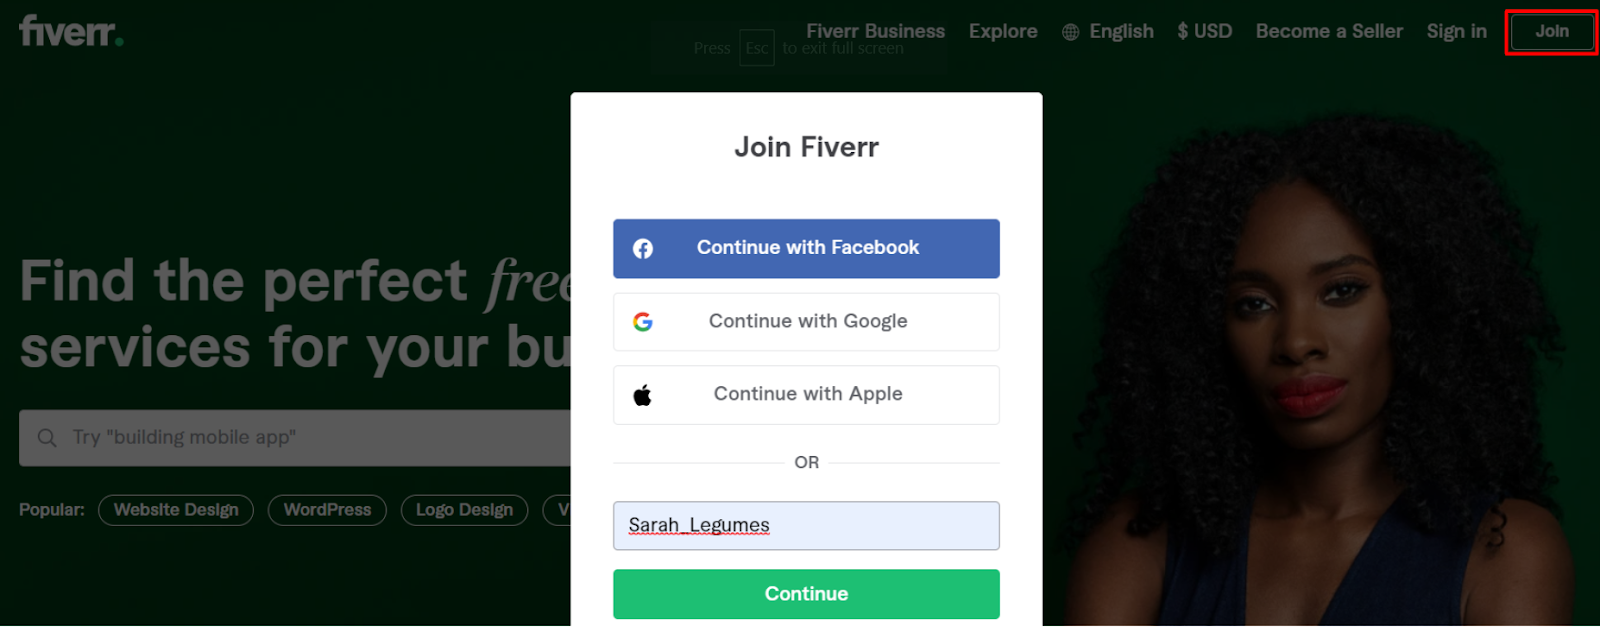 Fiverr homepage sign up